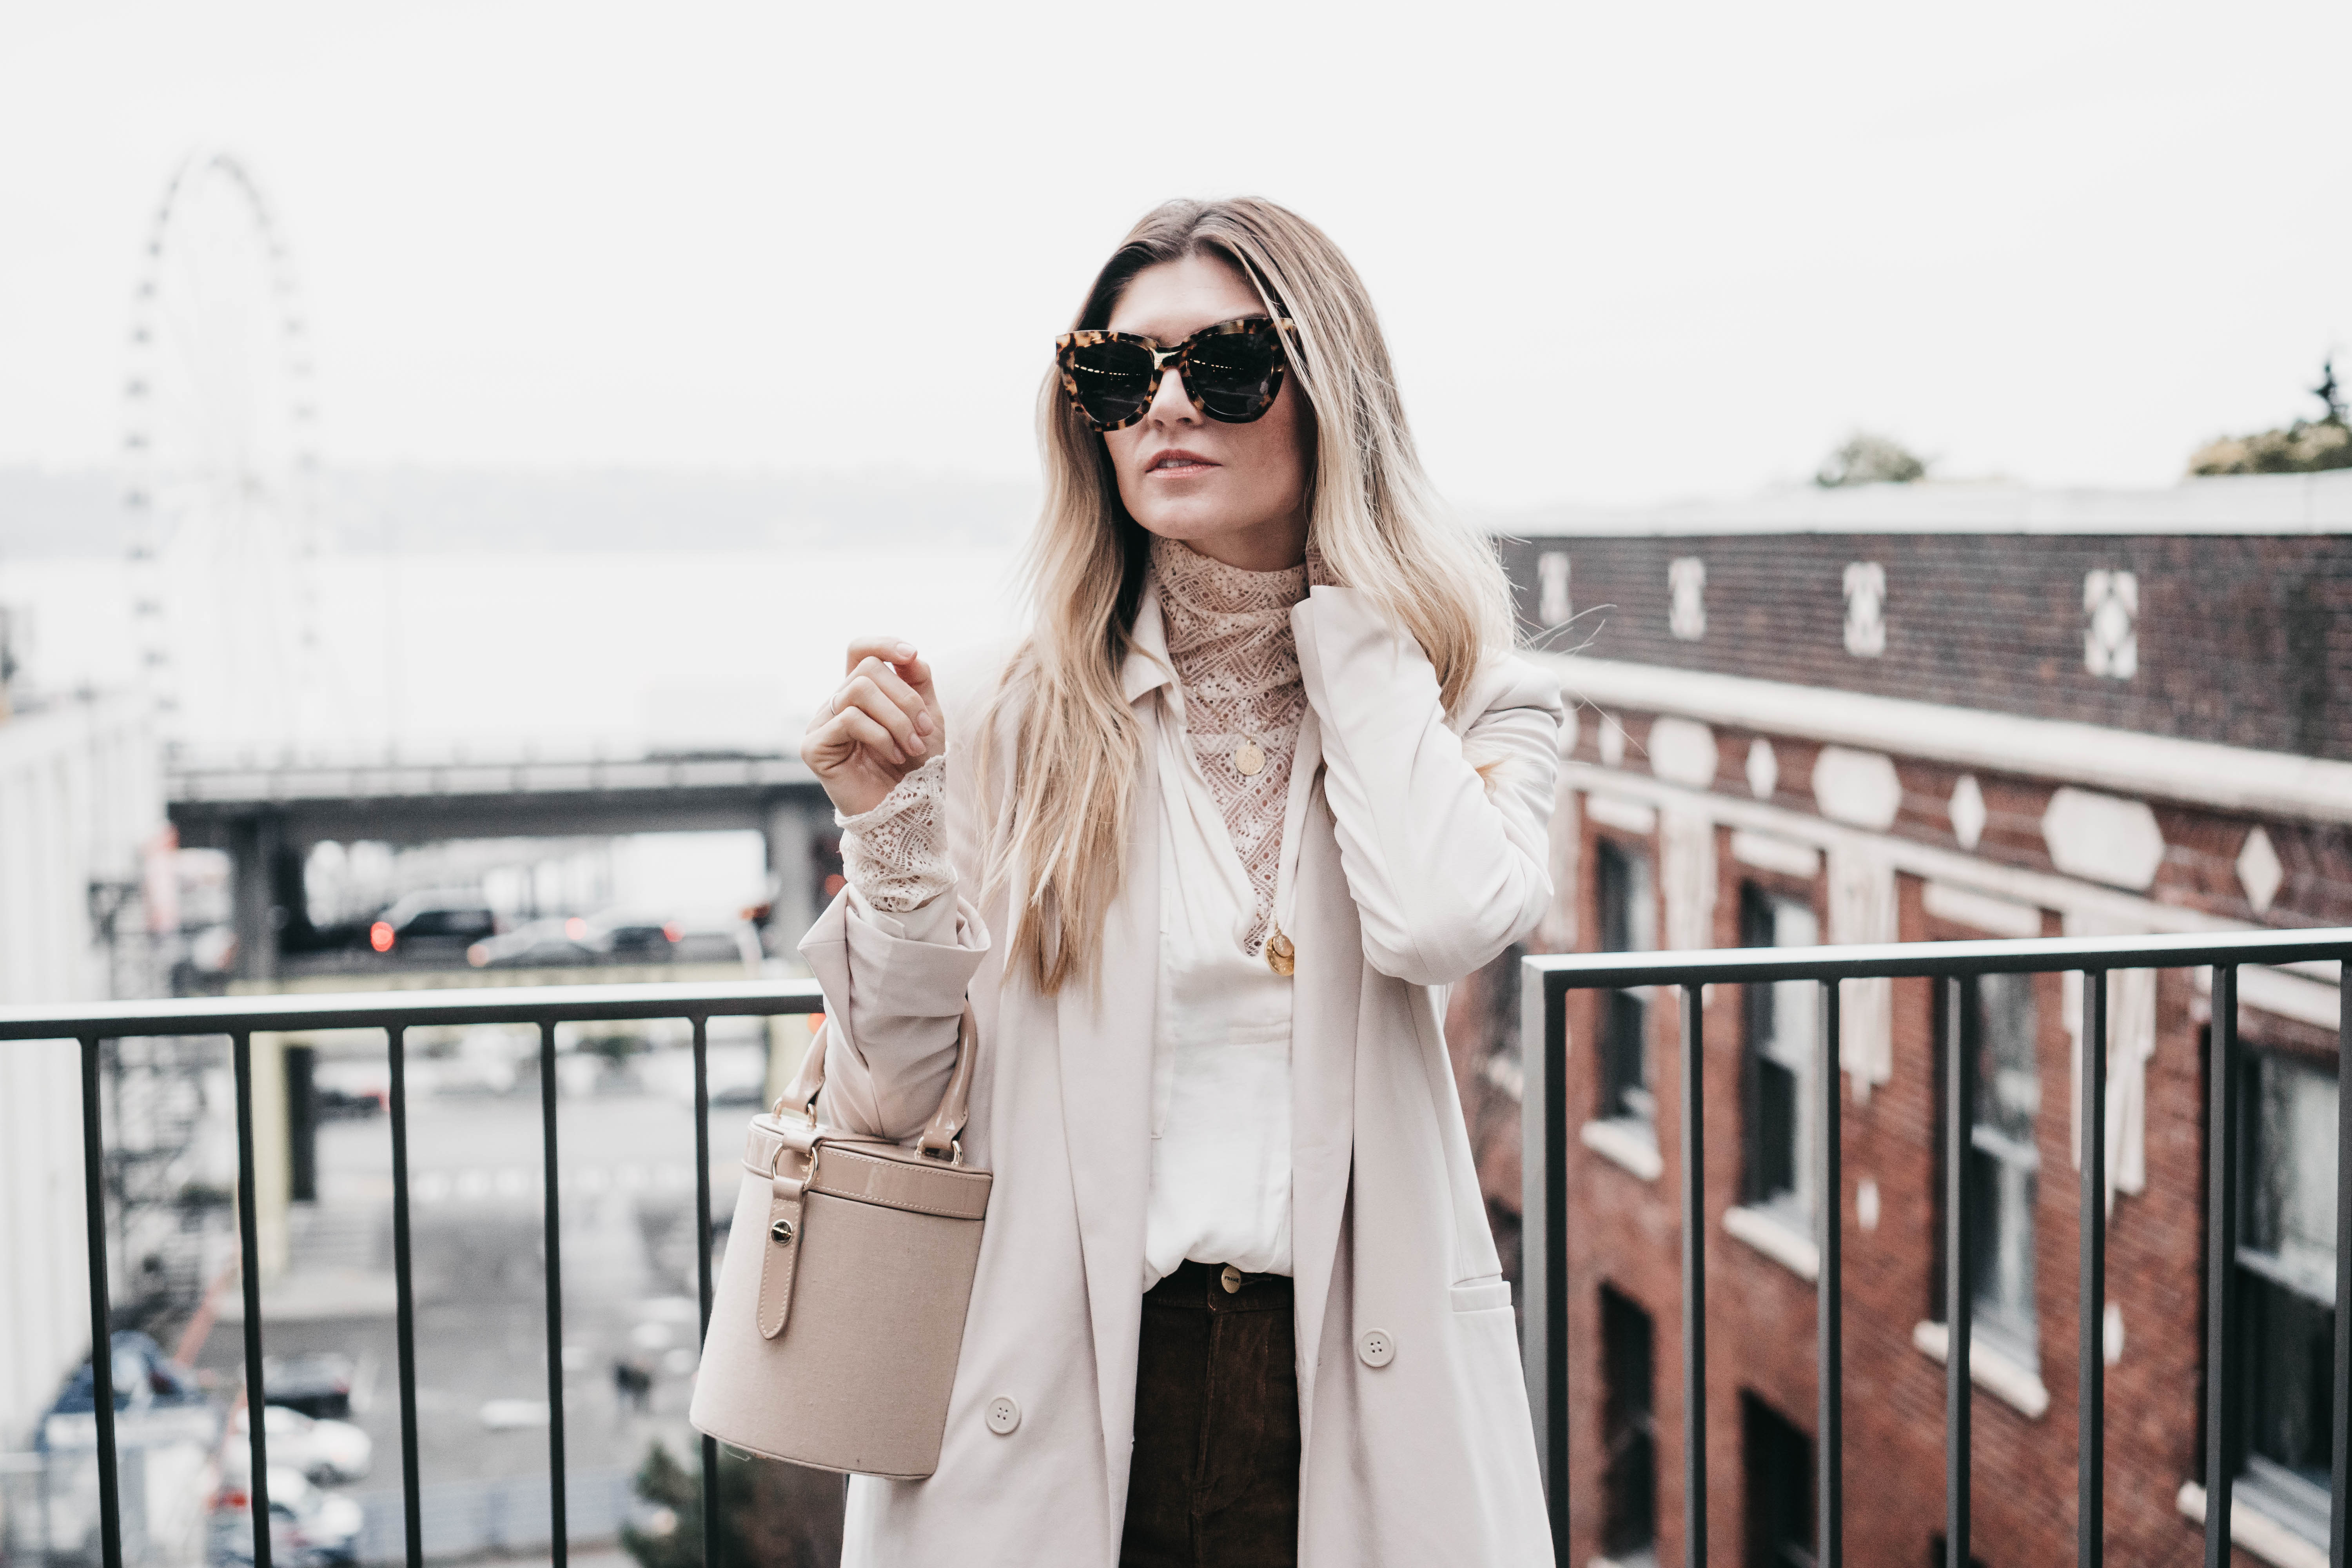 The Grey Edit - Neutral Fall Outfit Downtown